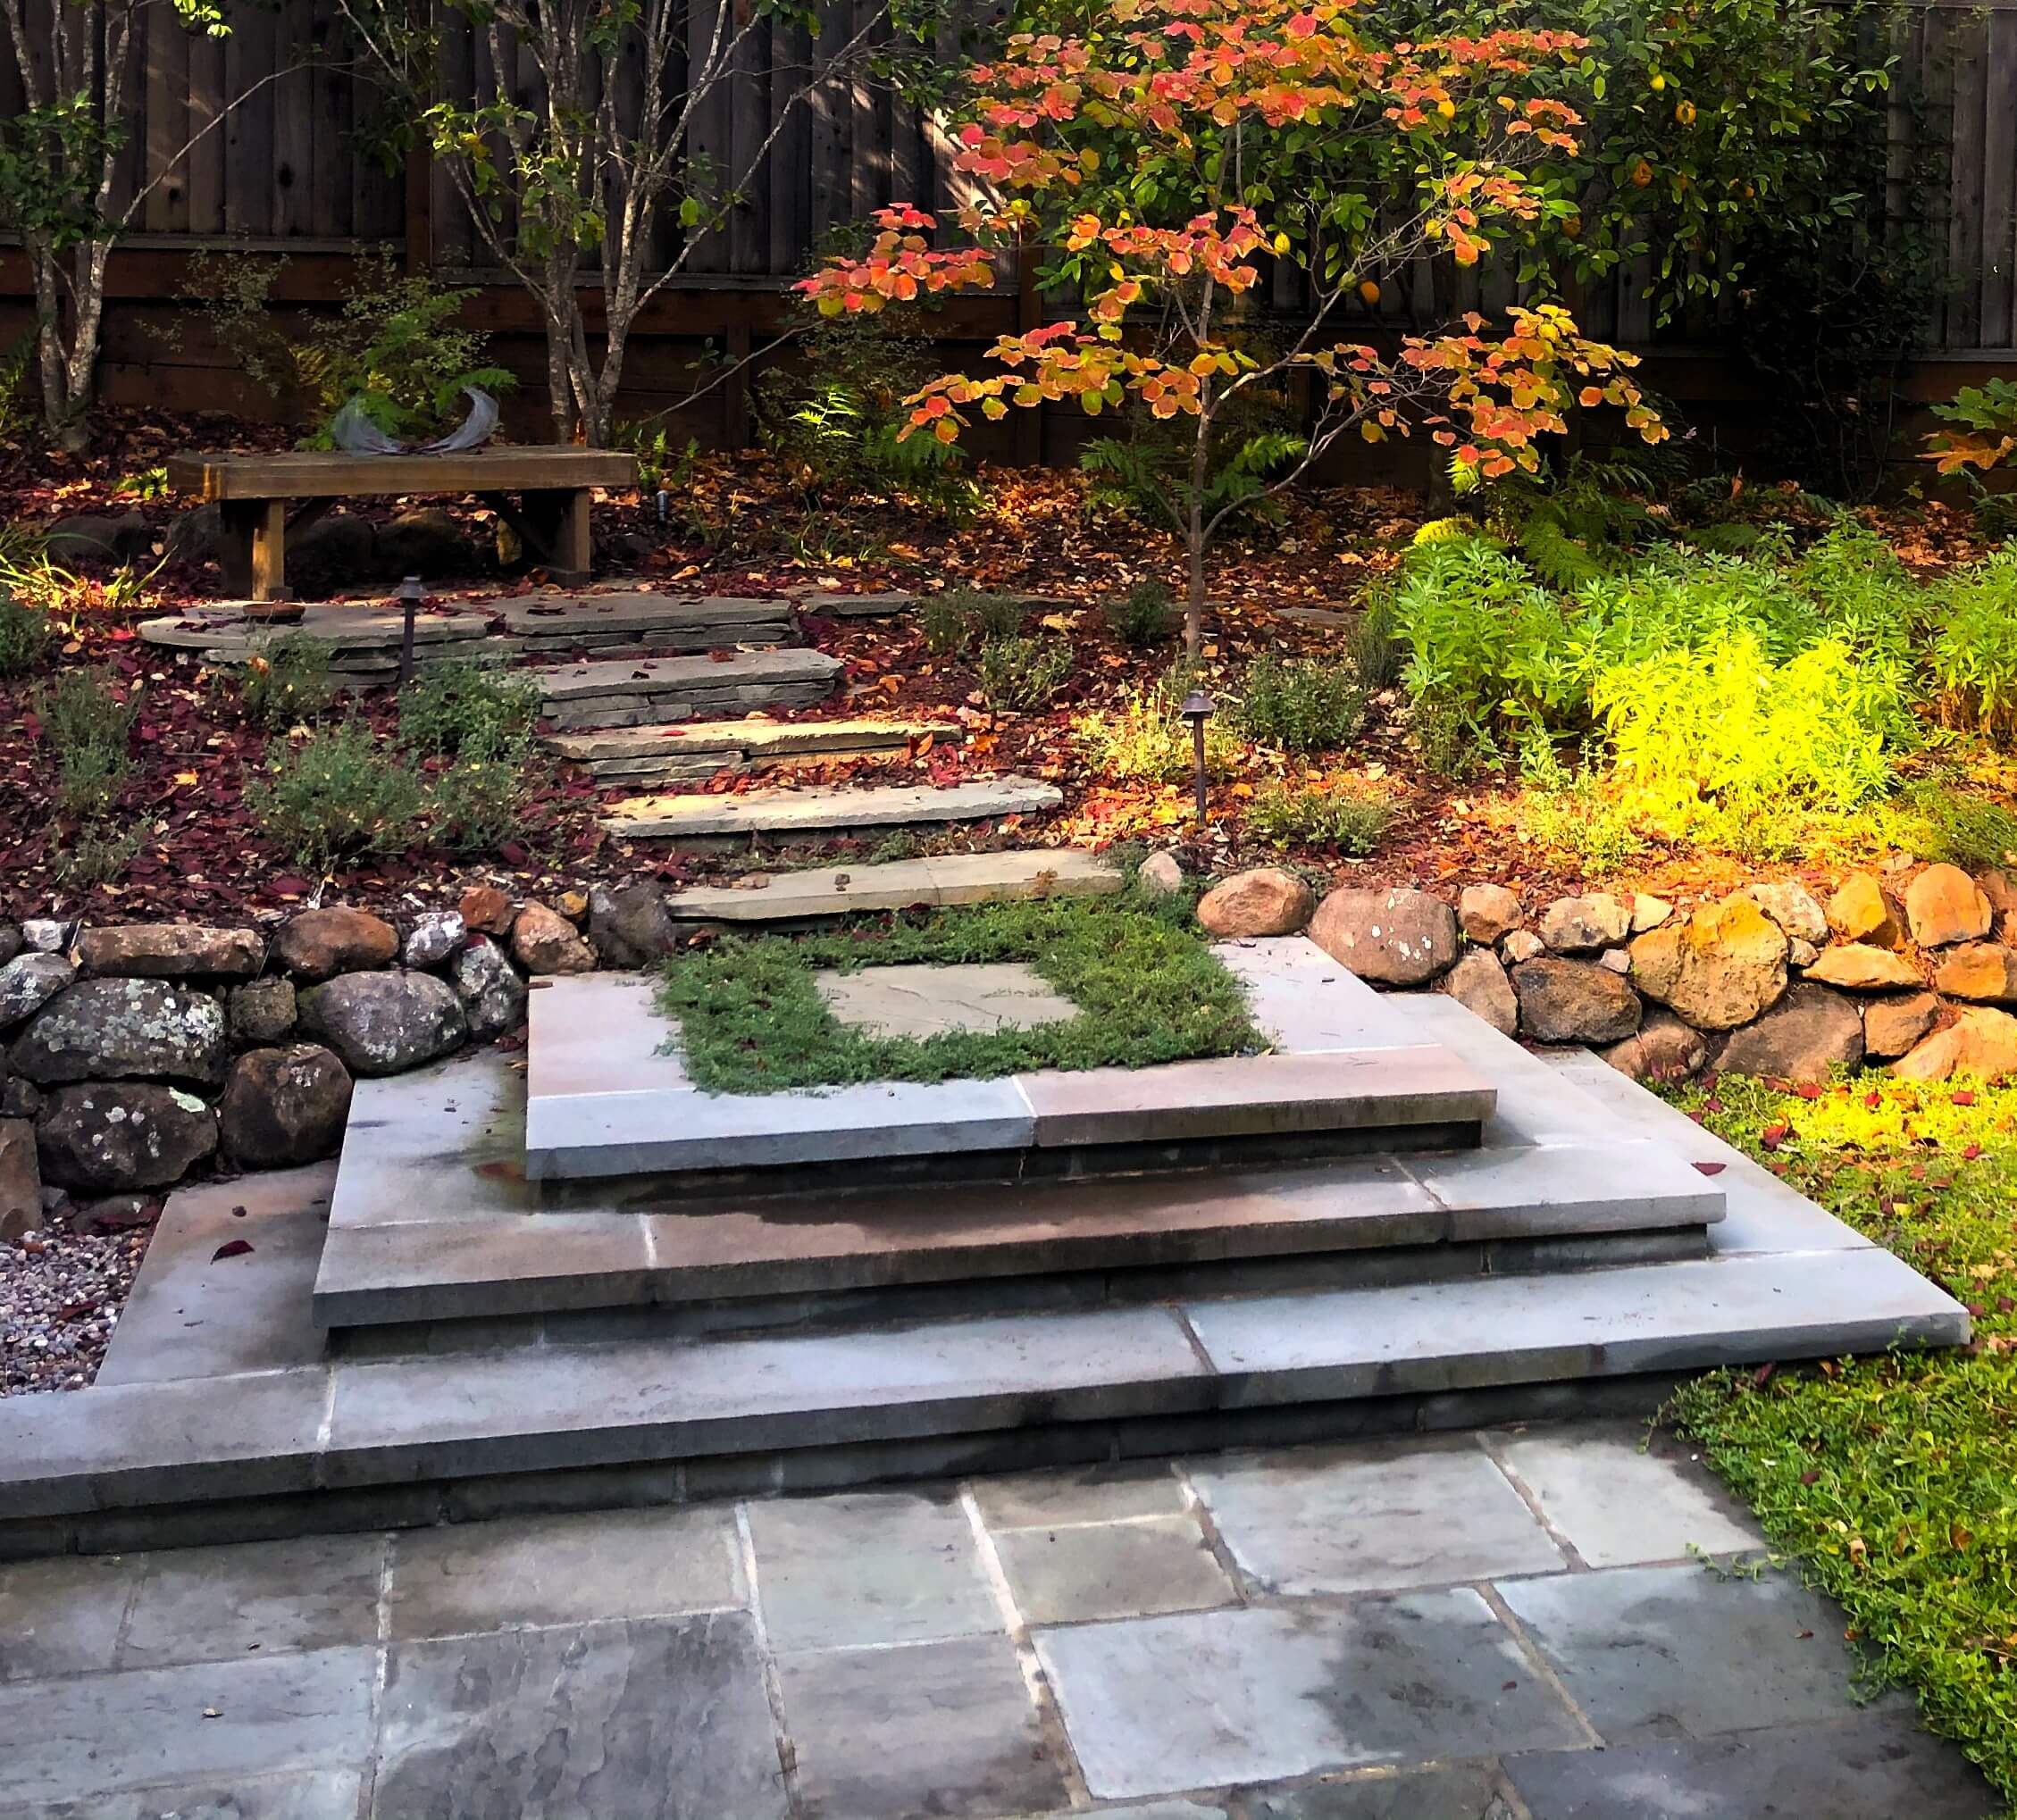 Custom stone steps leading to seating area in backyard amongst trees with fall foliage